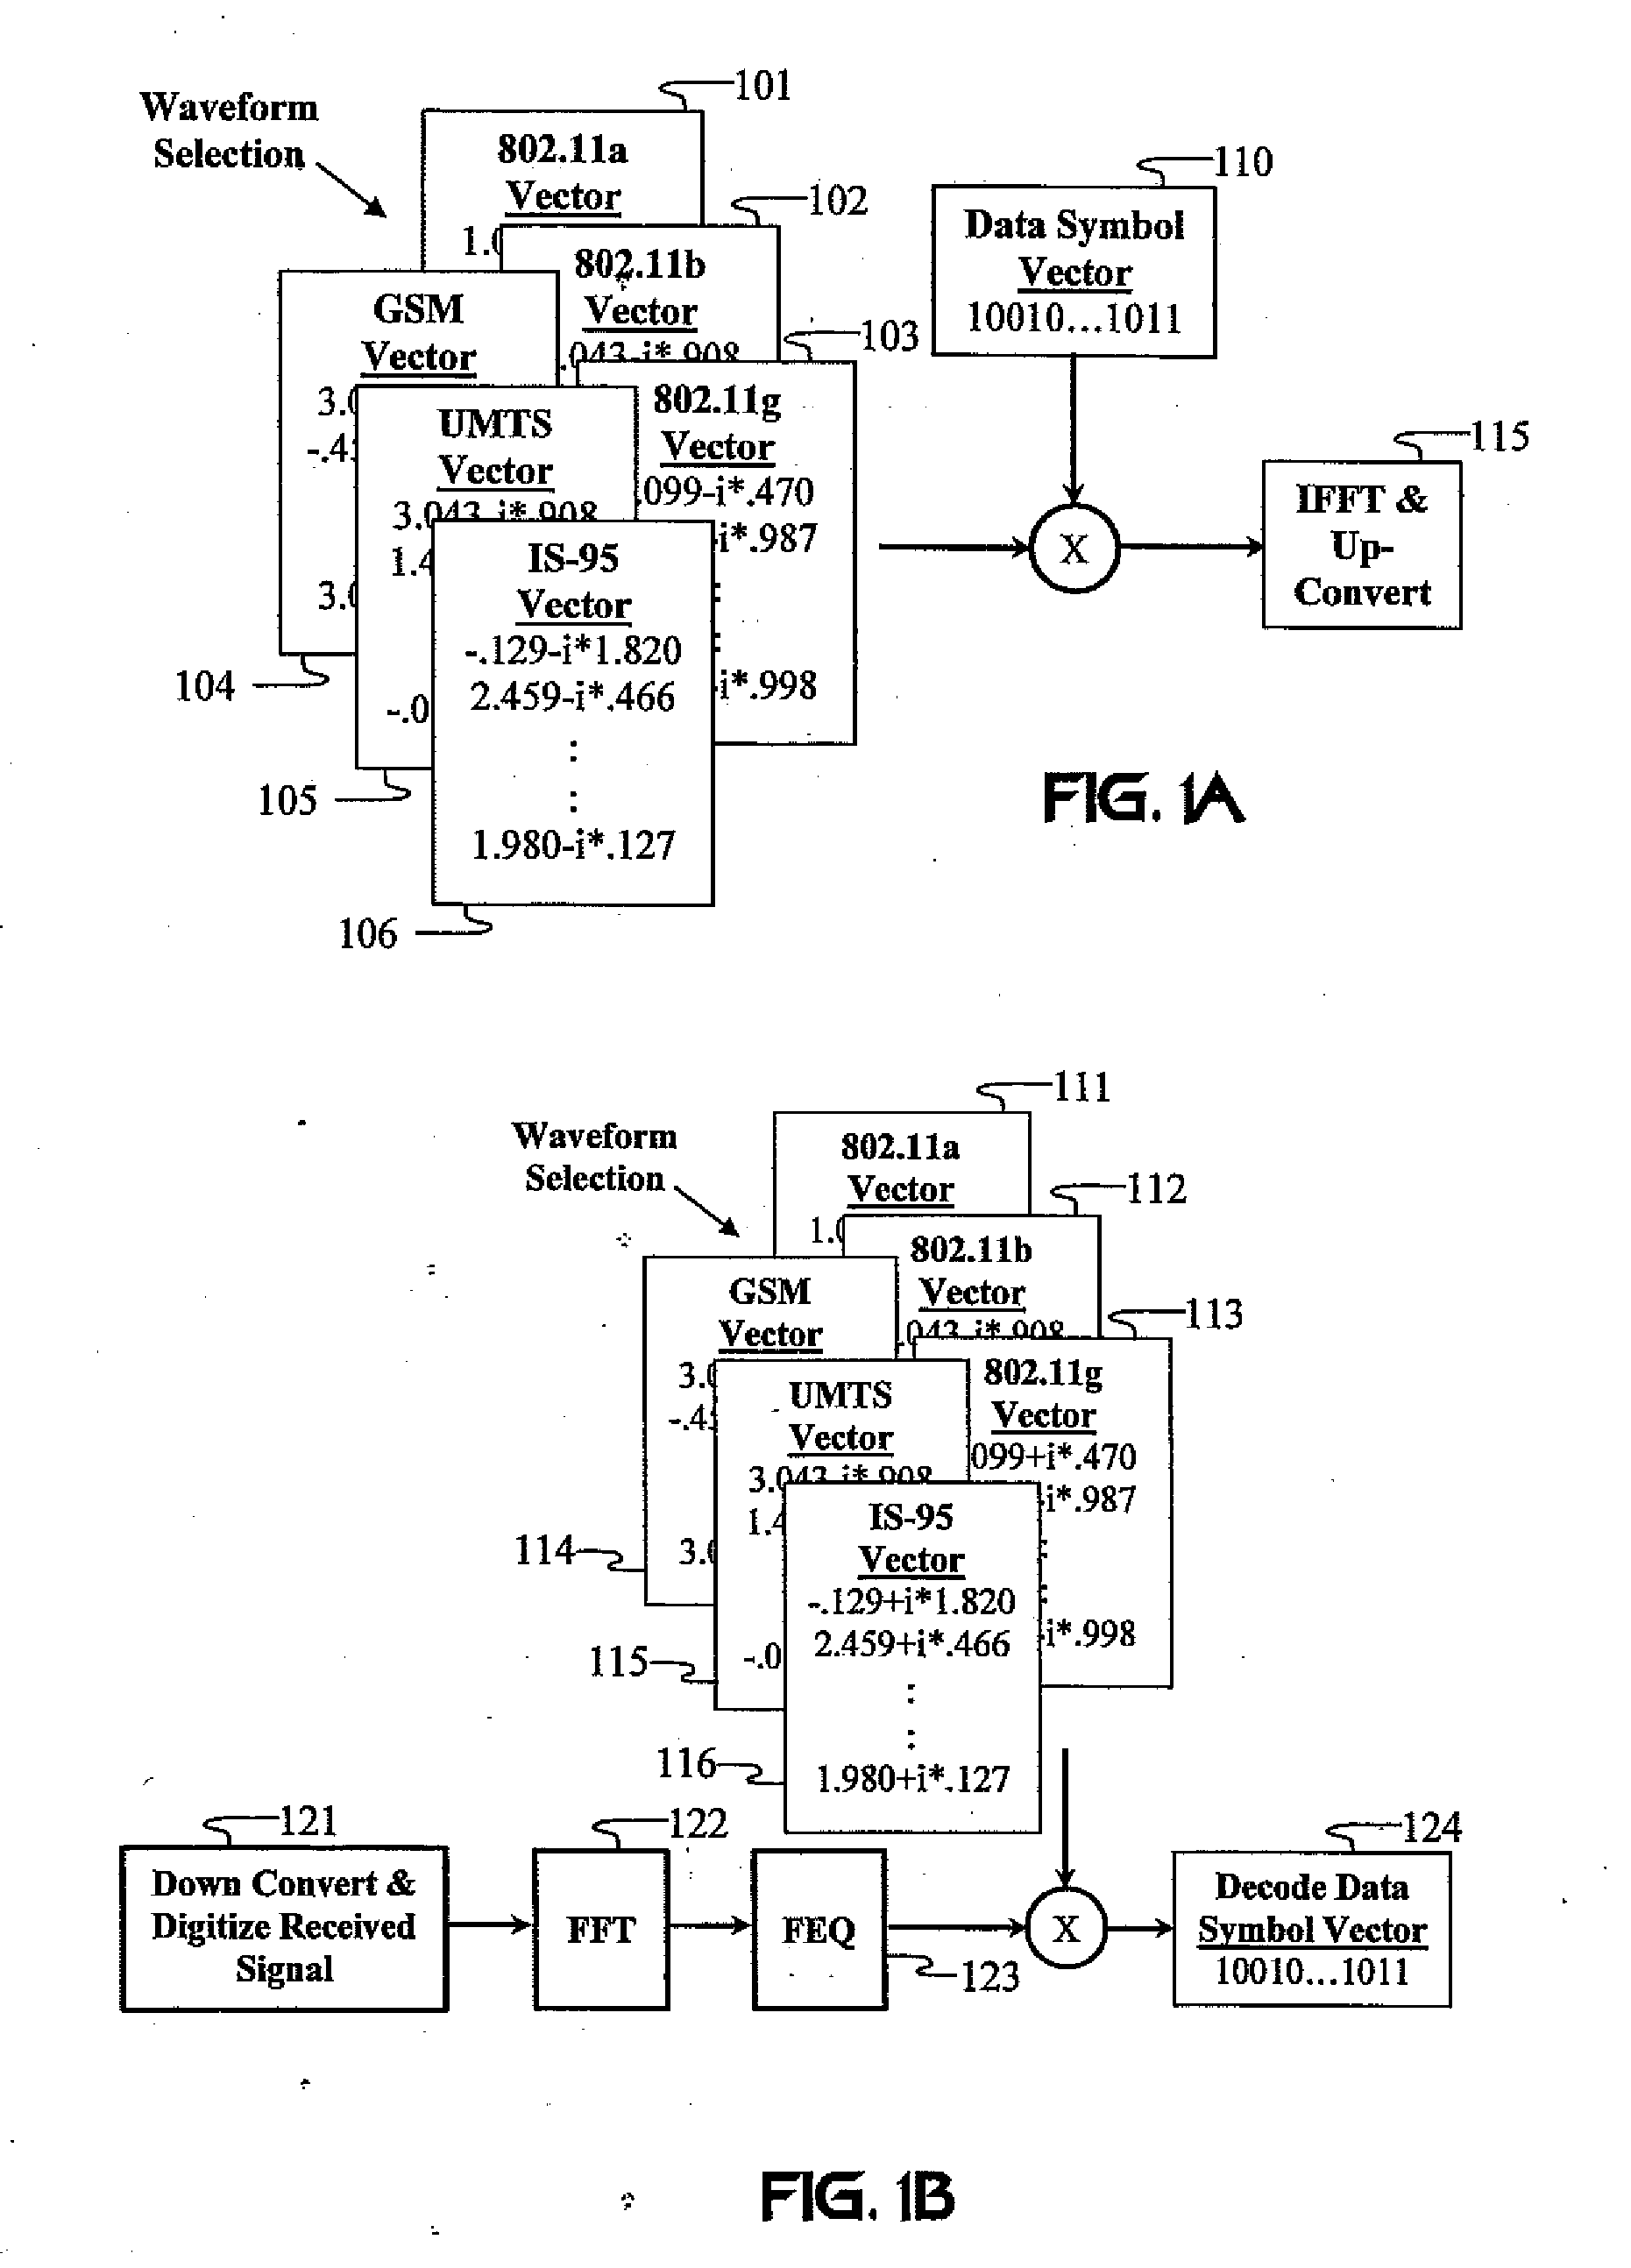 Software Adaptable High Performance Multicarrier Transmission Protocol